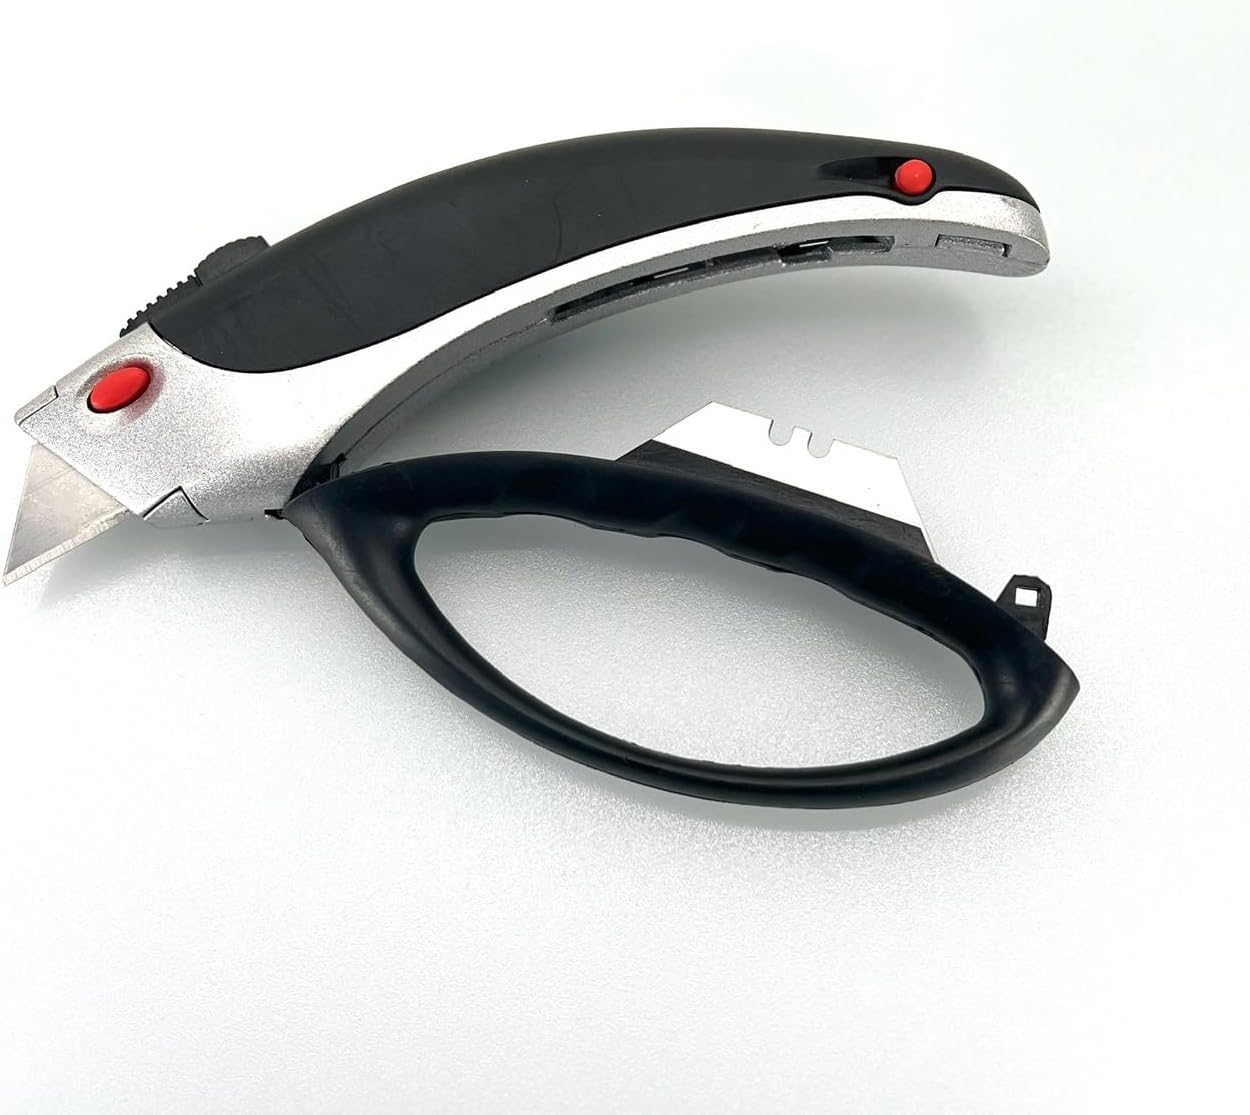 Retractable Utility Knife w/ Hand Guard - Features Extra Blade Storage & Knuckle Protection - EP-285